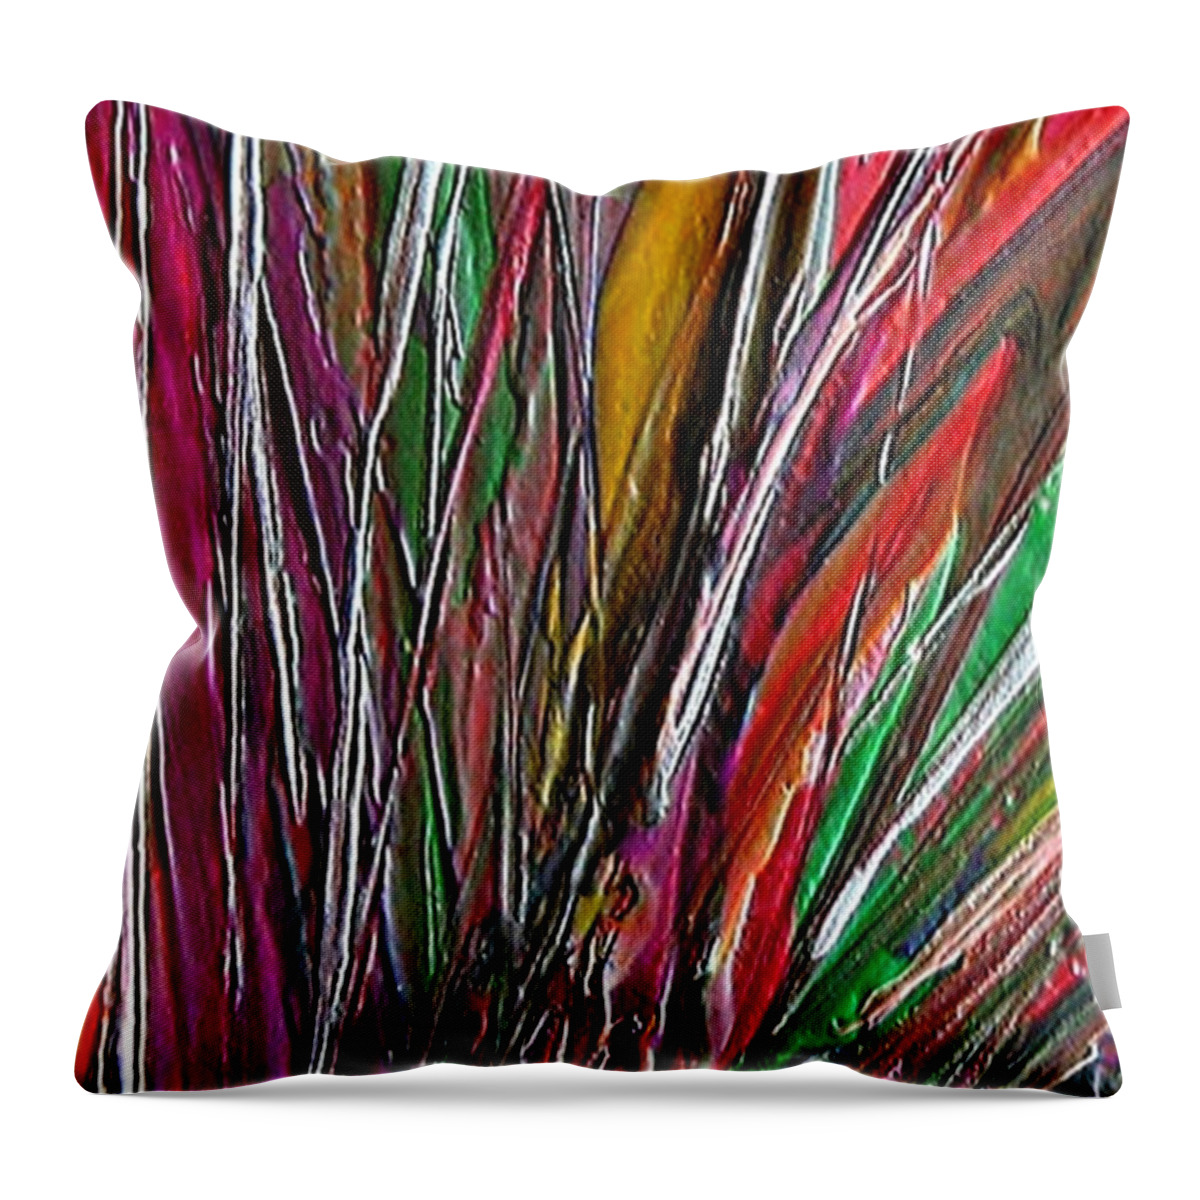 Encaustic Painting Throw Pillow featuring the painting Autumn reeds by Dragica Micki Fortuna